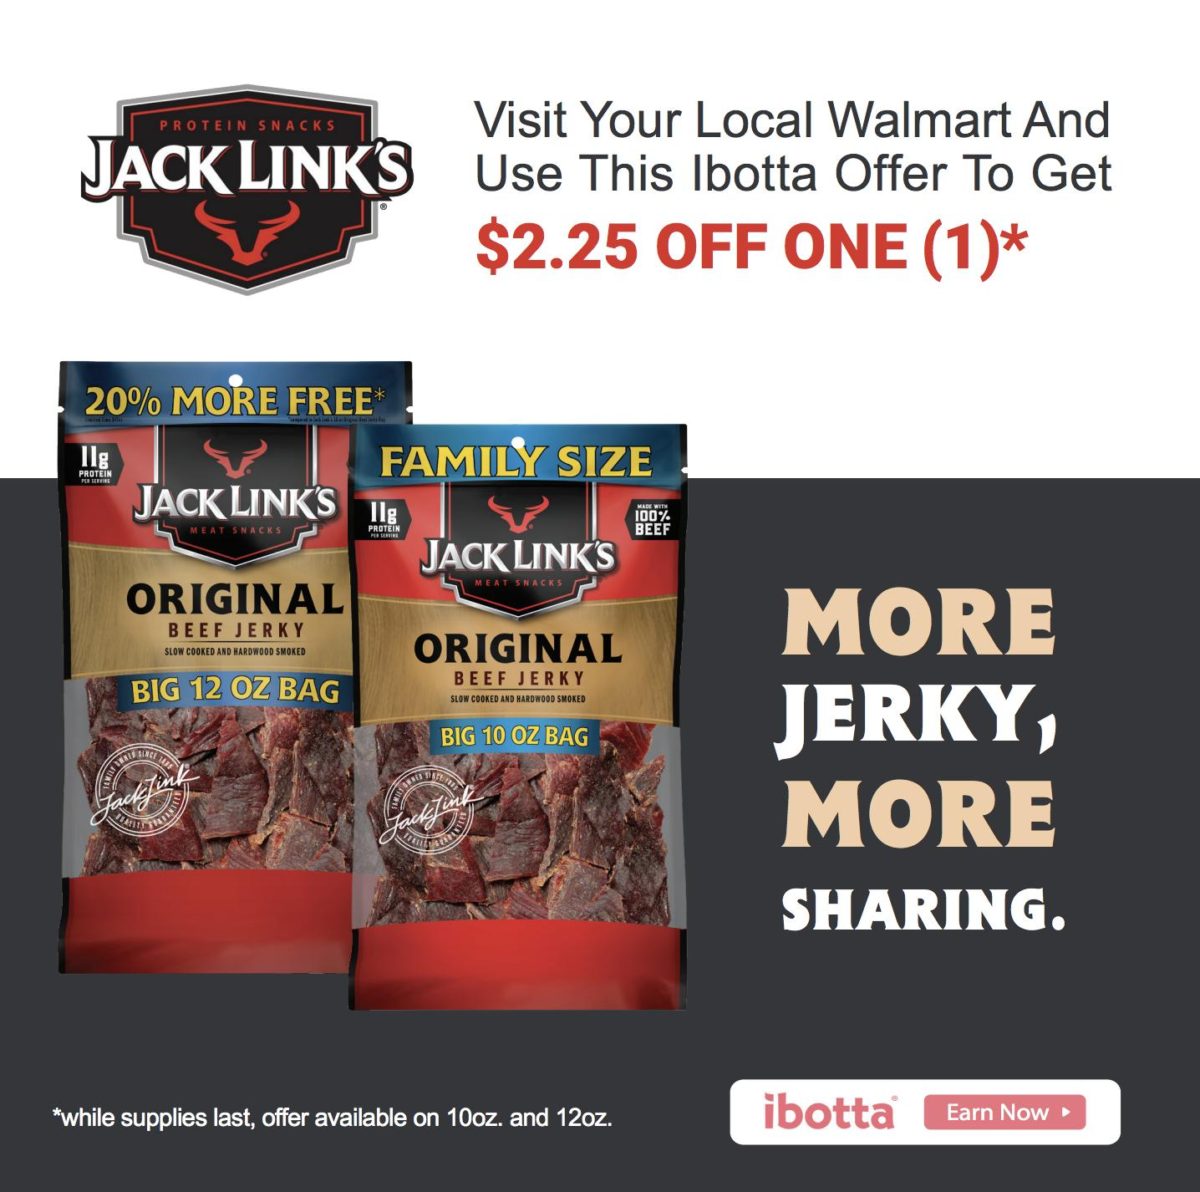 Jack Link’s Beef Jerky Is Perfect For Every Occasion